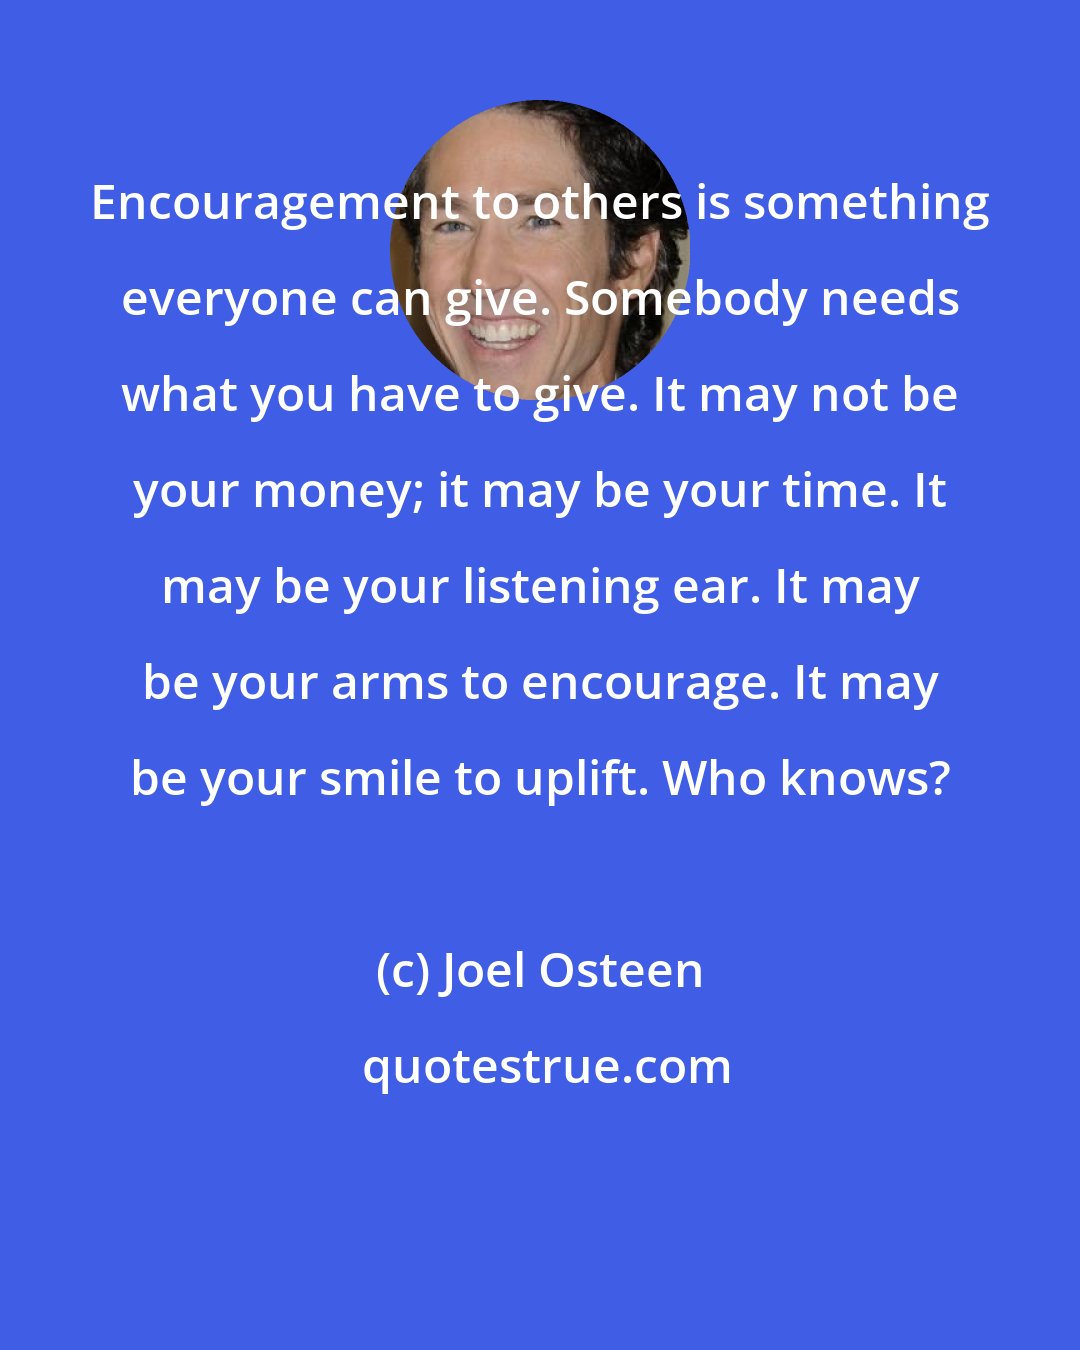 Joel Osteen: Encouragement to others is something everyone can give. Somebody needs what you have to give. It may not be your money; it may be your time. It may be your listening ear. It may be your arms to encourage. It may be your smile to uplift. Who knows?